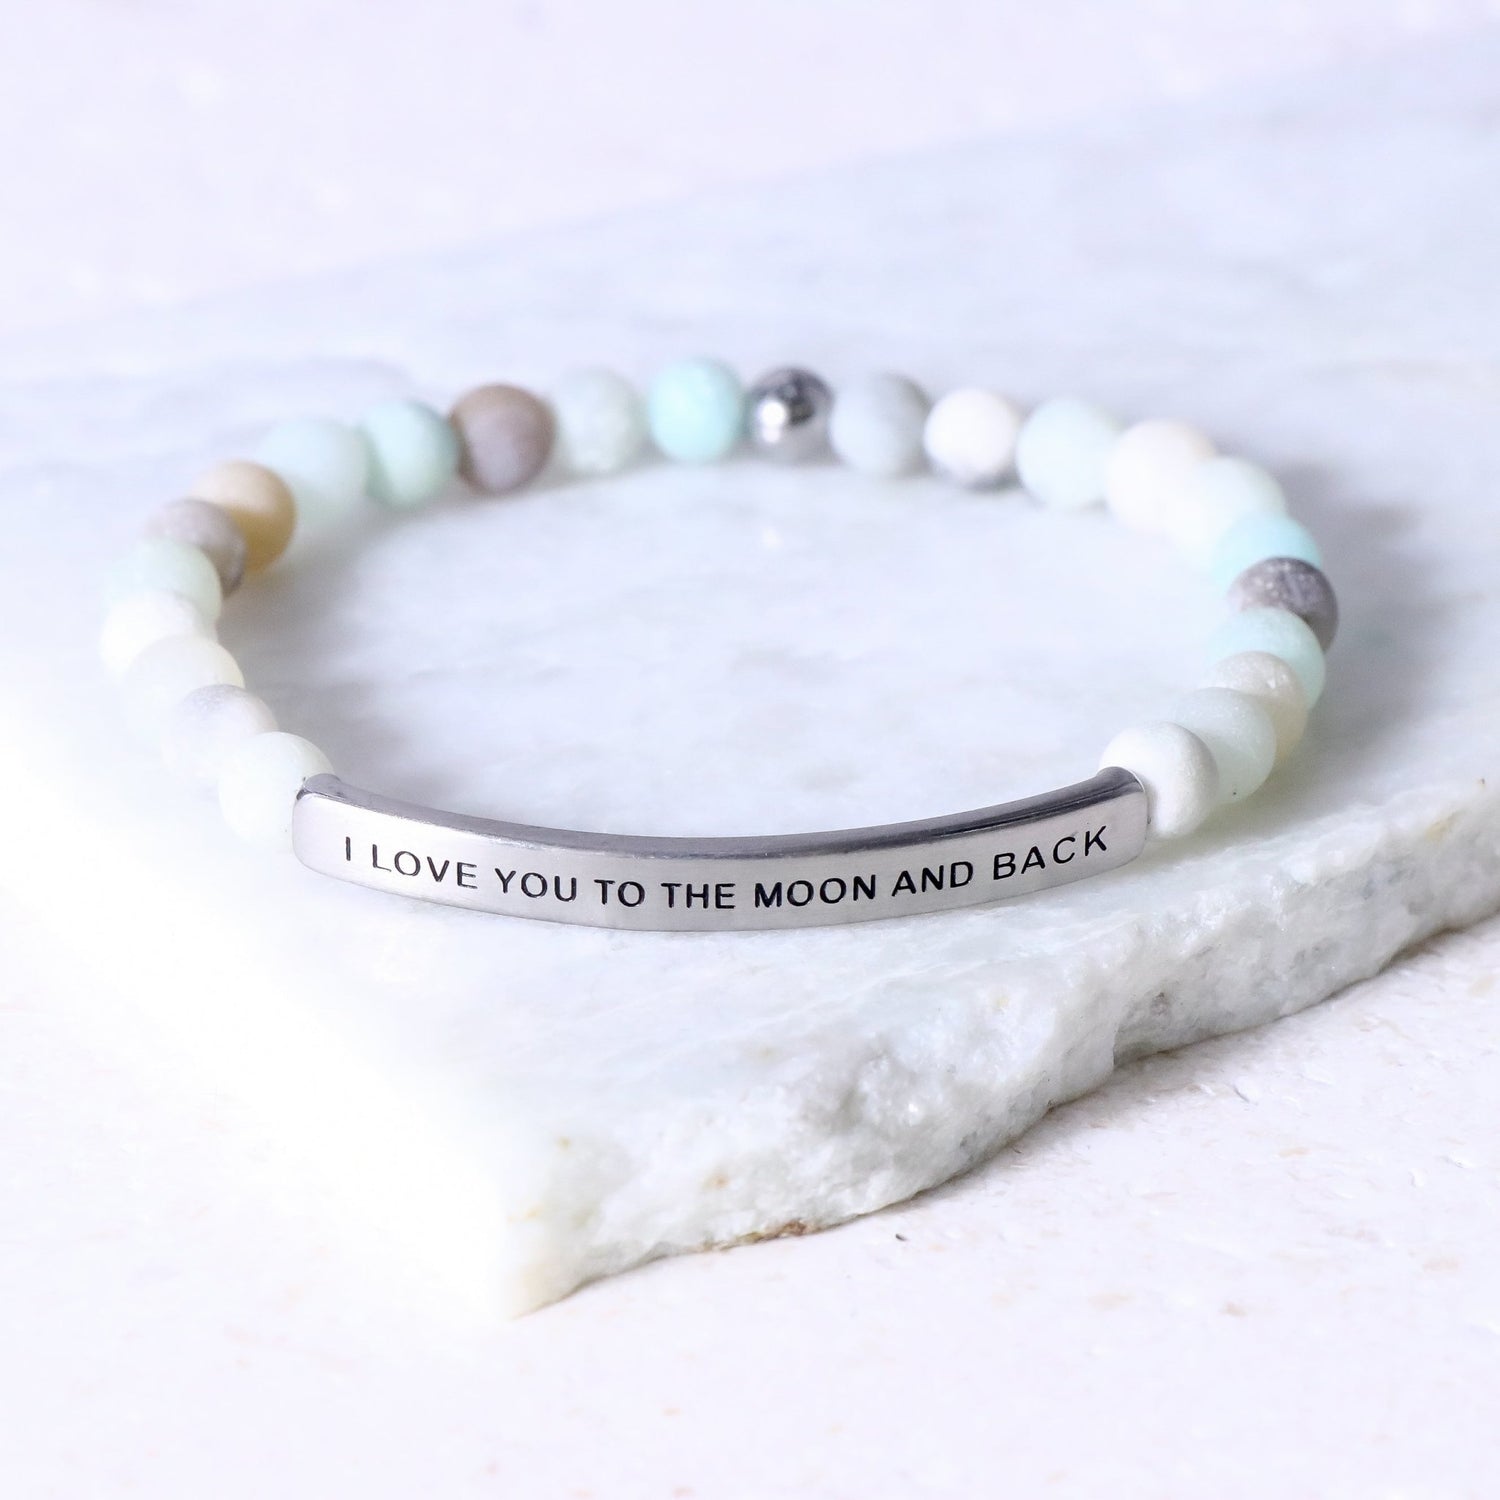 I LOVE YOU TO THE MOON AND BACK - Kids Collection - Inspiration Co.